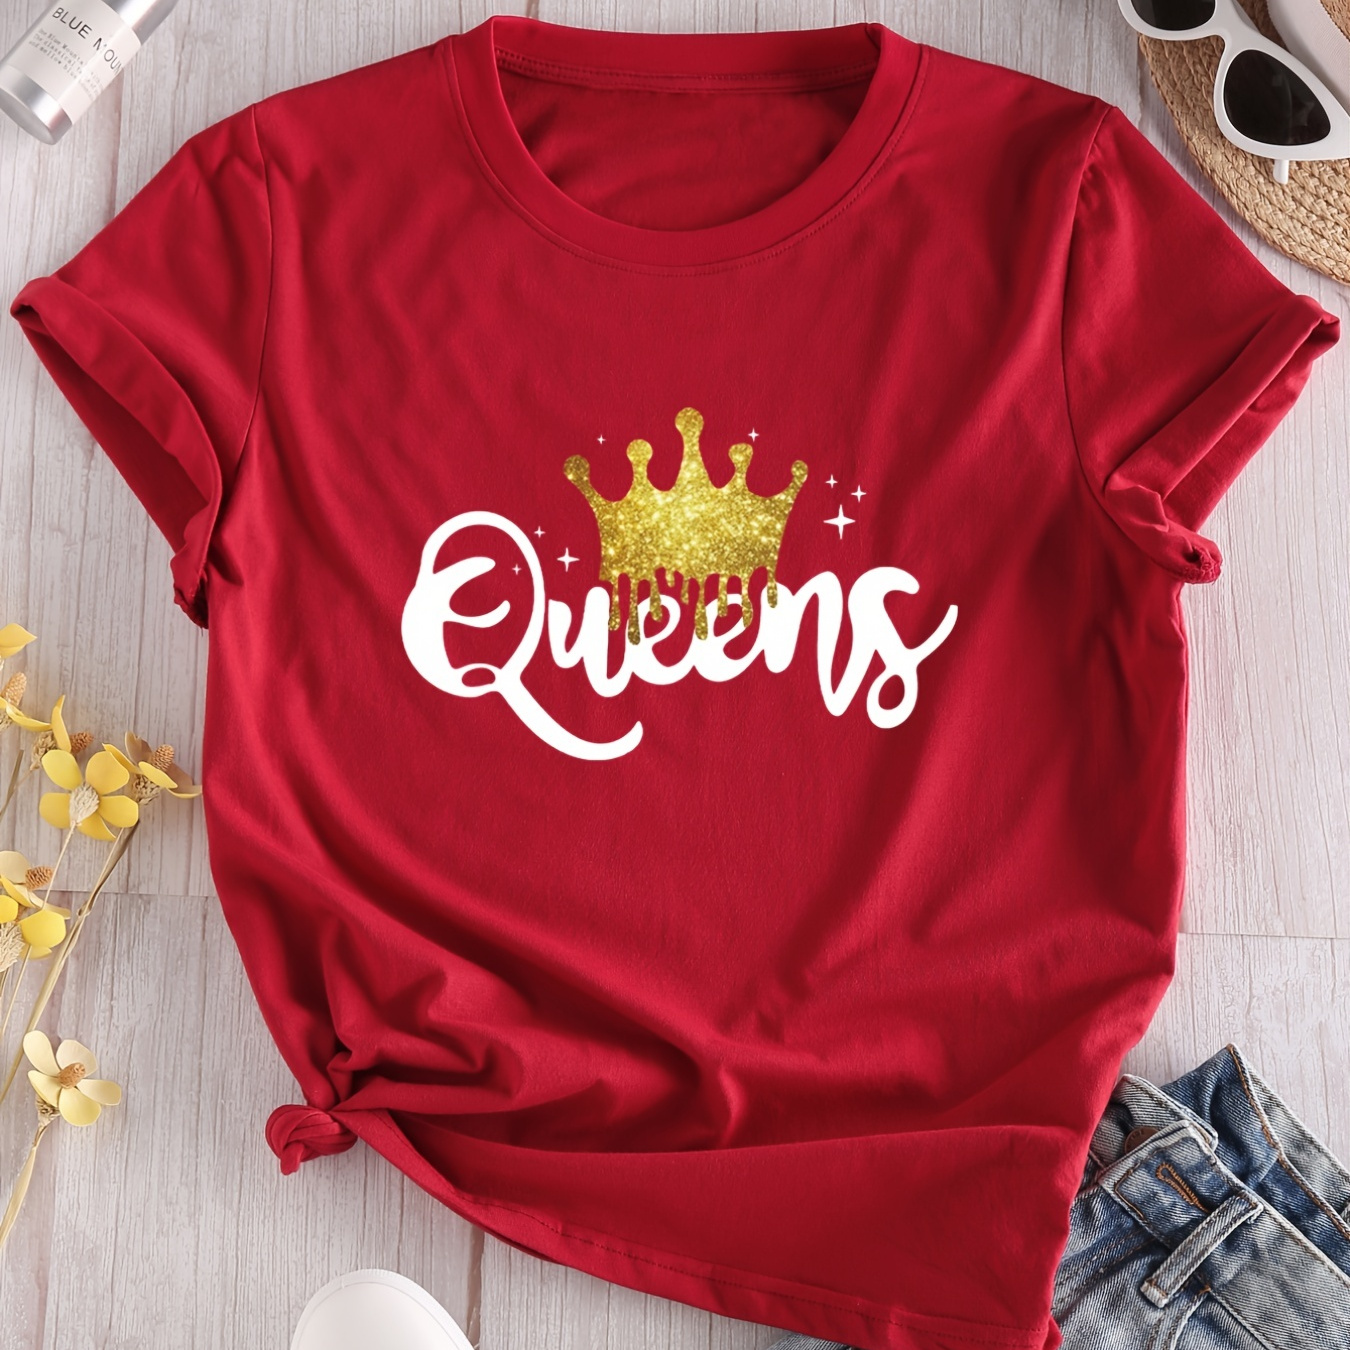 

Women's Queen Letter Print T-shirt, Casual Crew Neck Short Sleeve T-shirt, Casual Every Day Tops, Women's Clothing